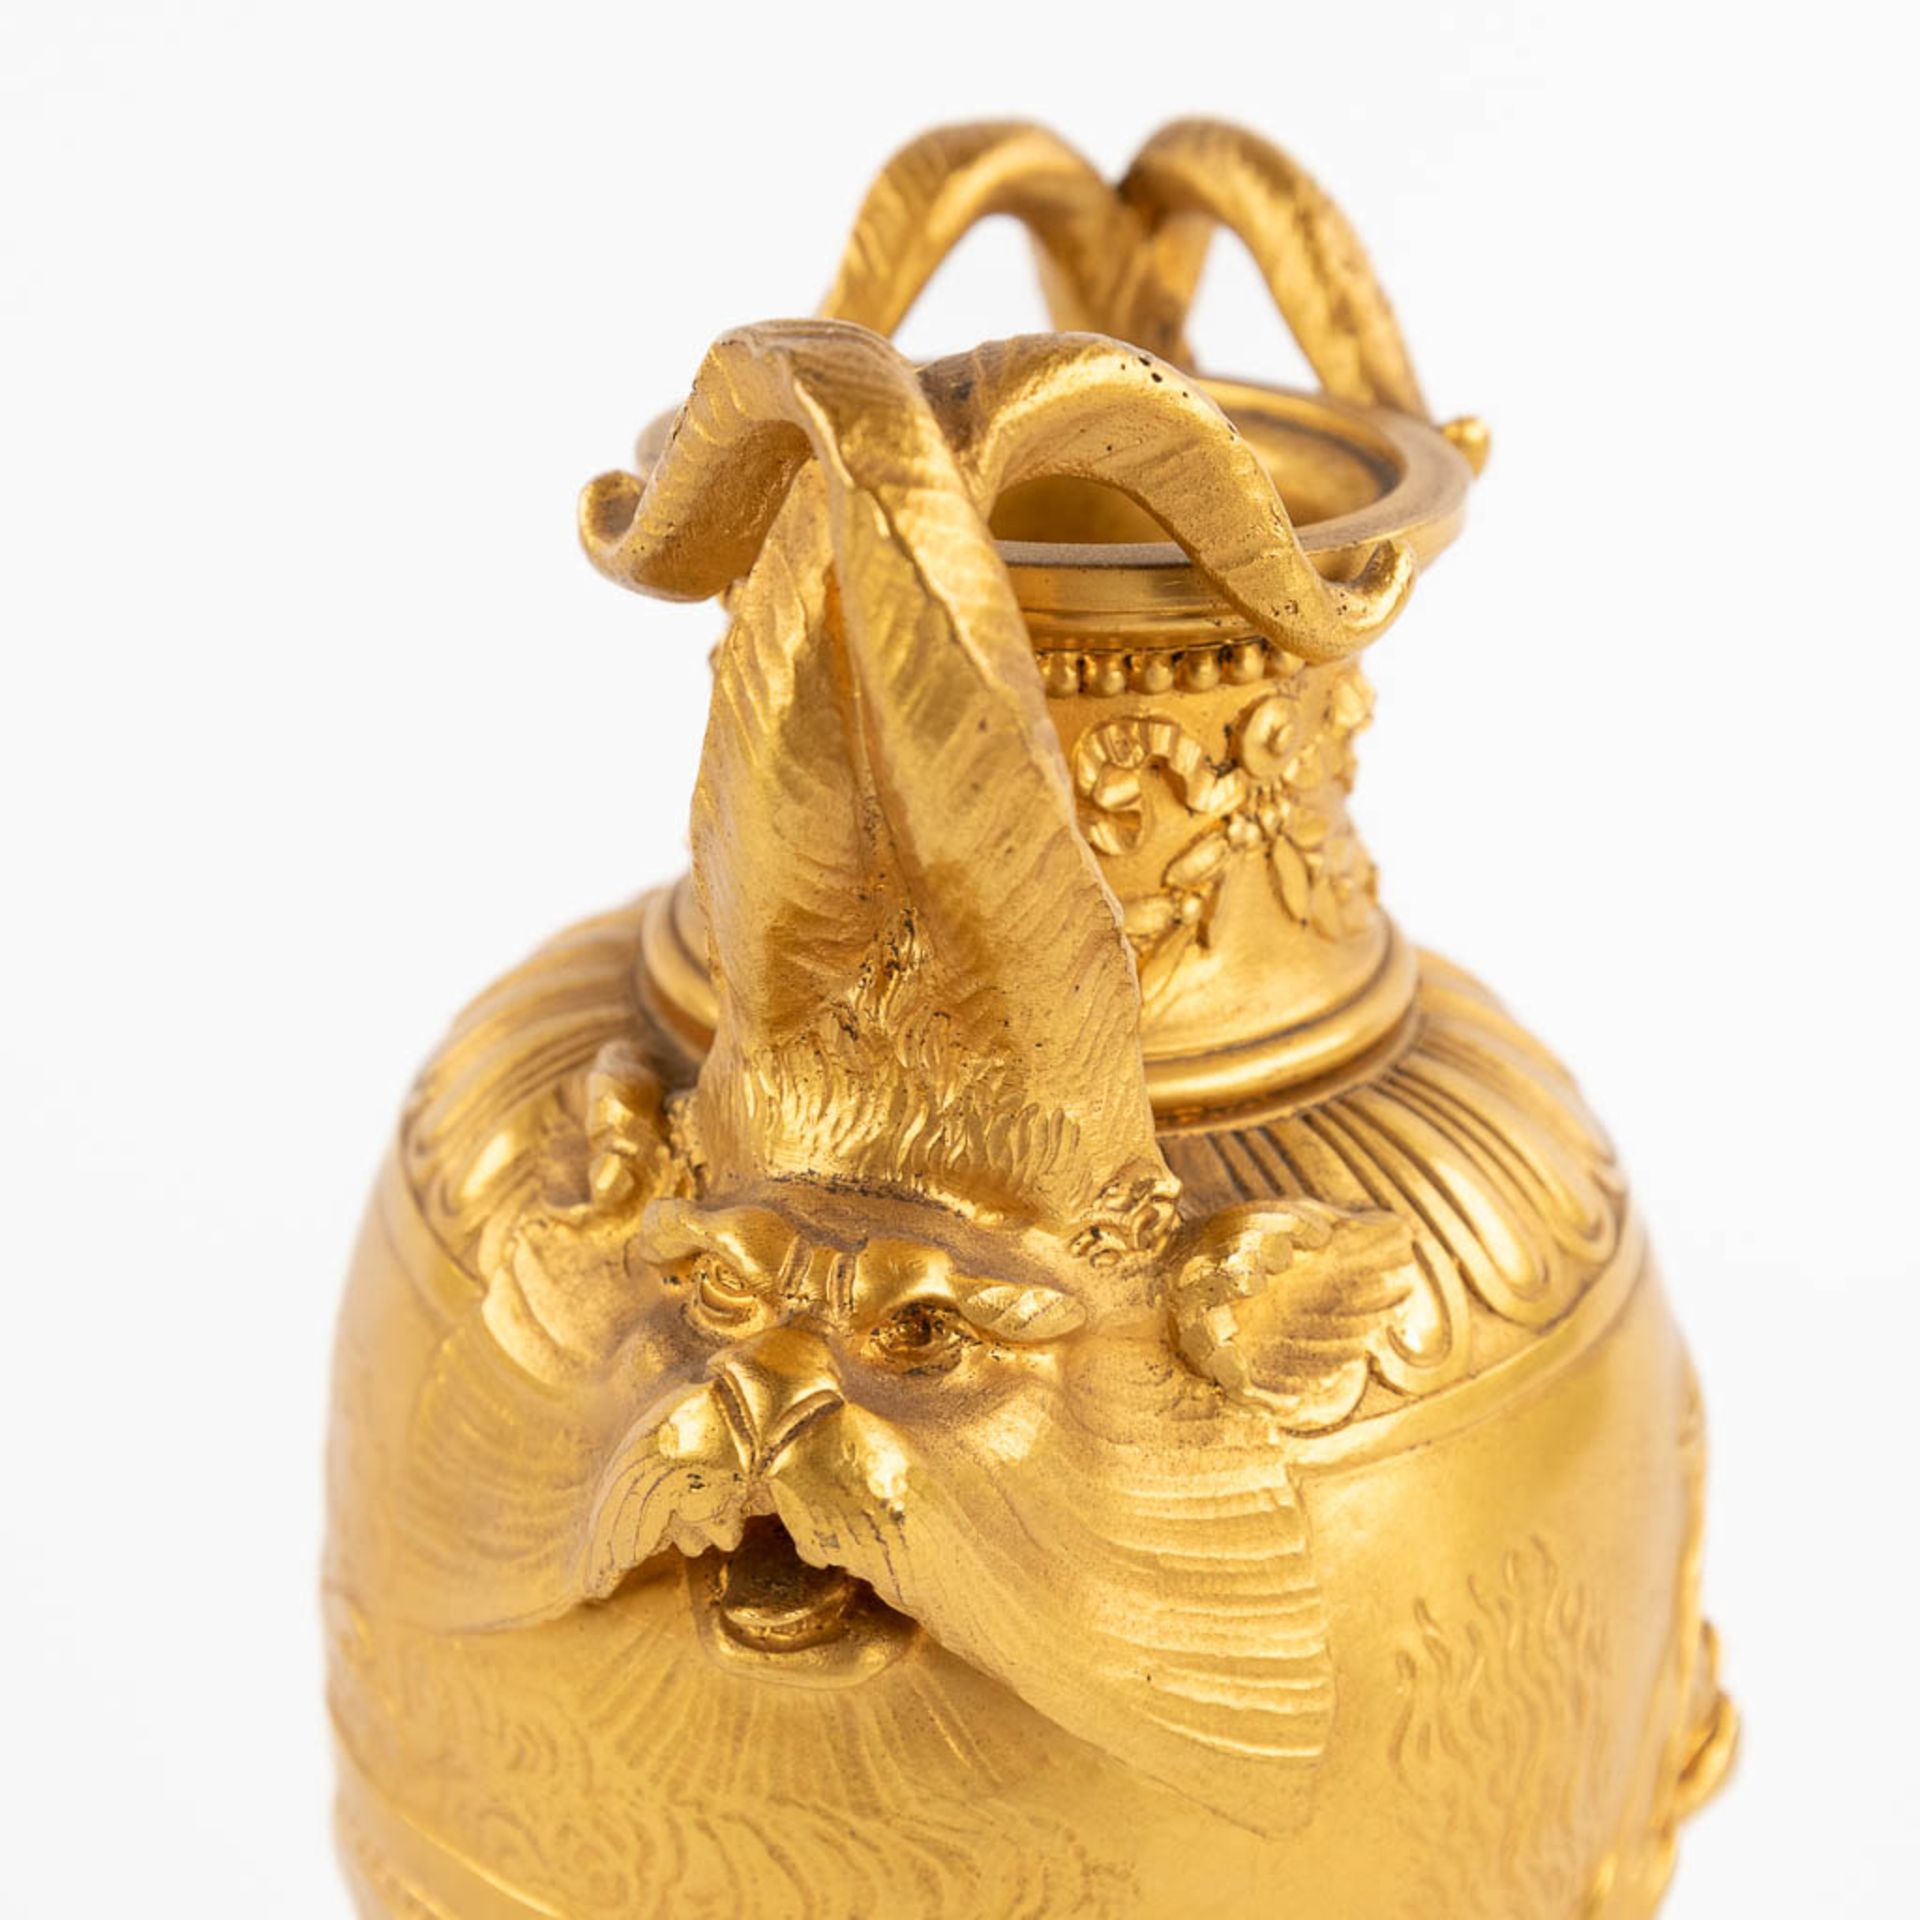 Ferdinand BARBEDIENNE (1810-1892) 'Gilt Bronze Vase with mythological figurines.' 19th C. (D:8 x W:9 - Image 9 of 12